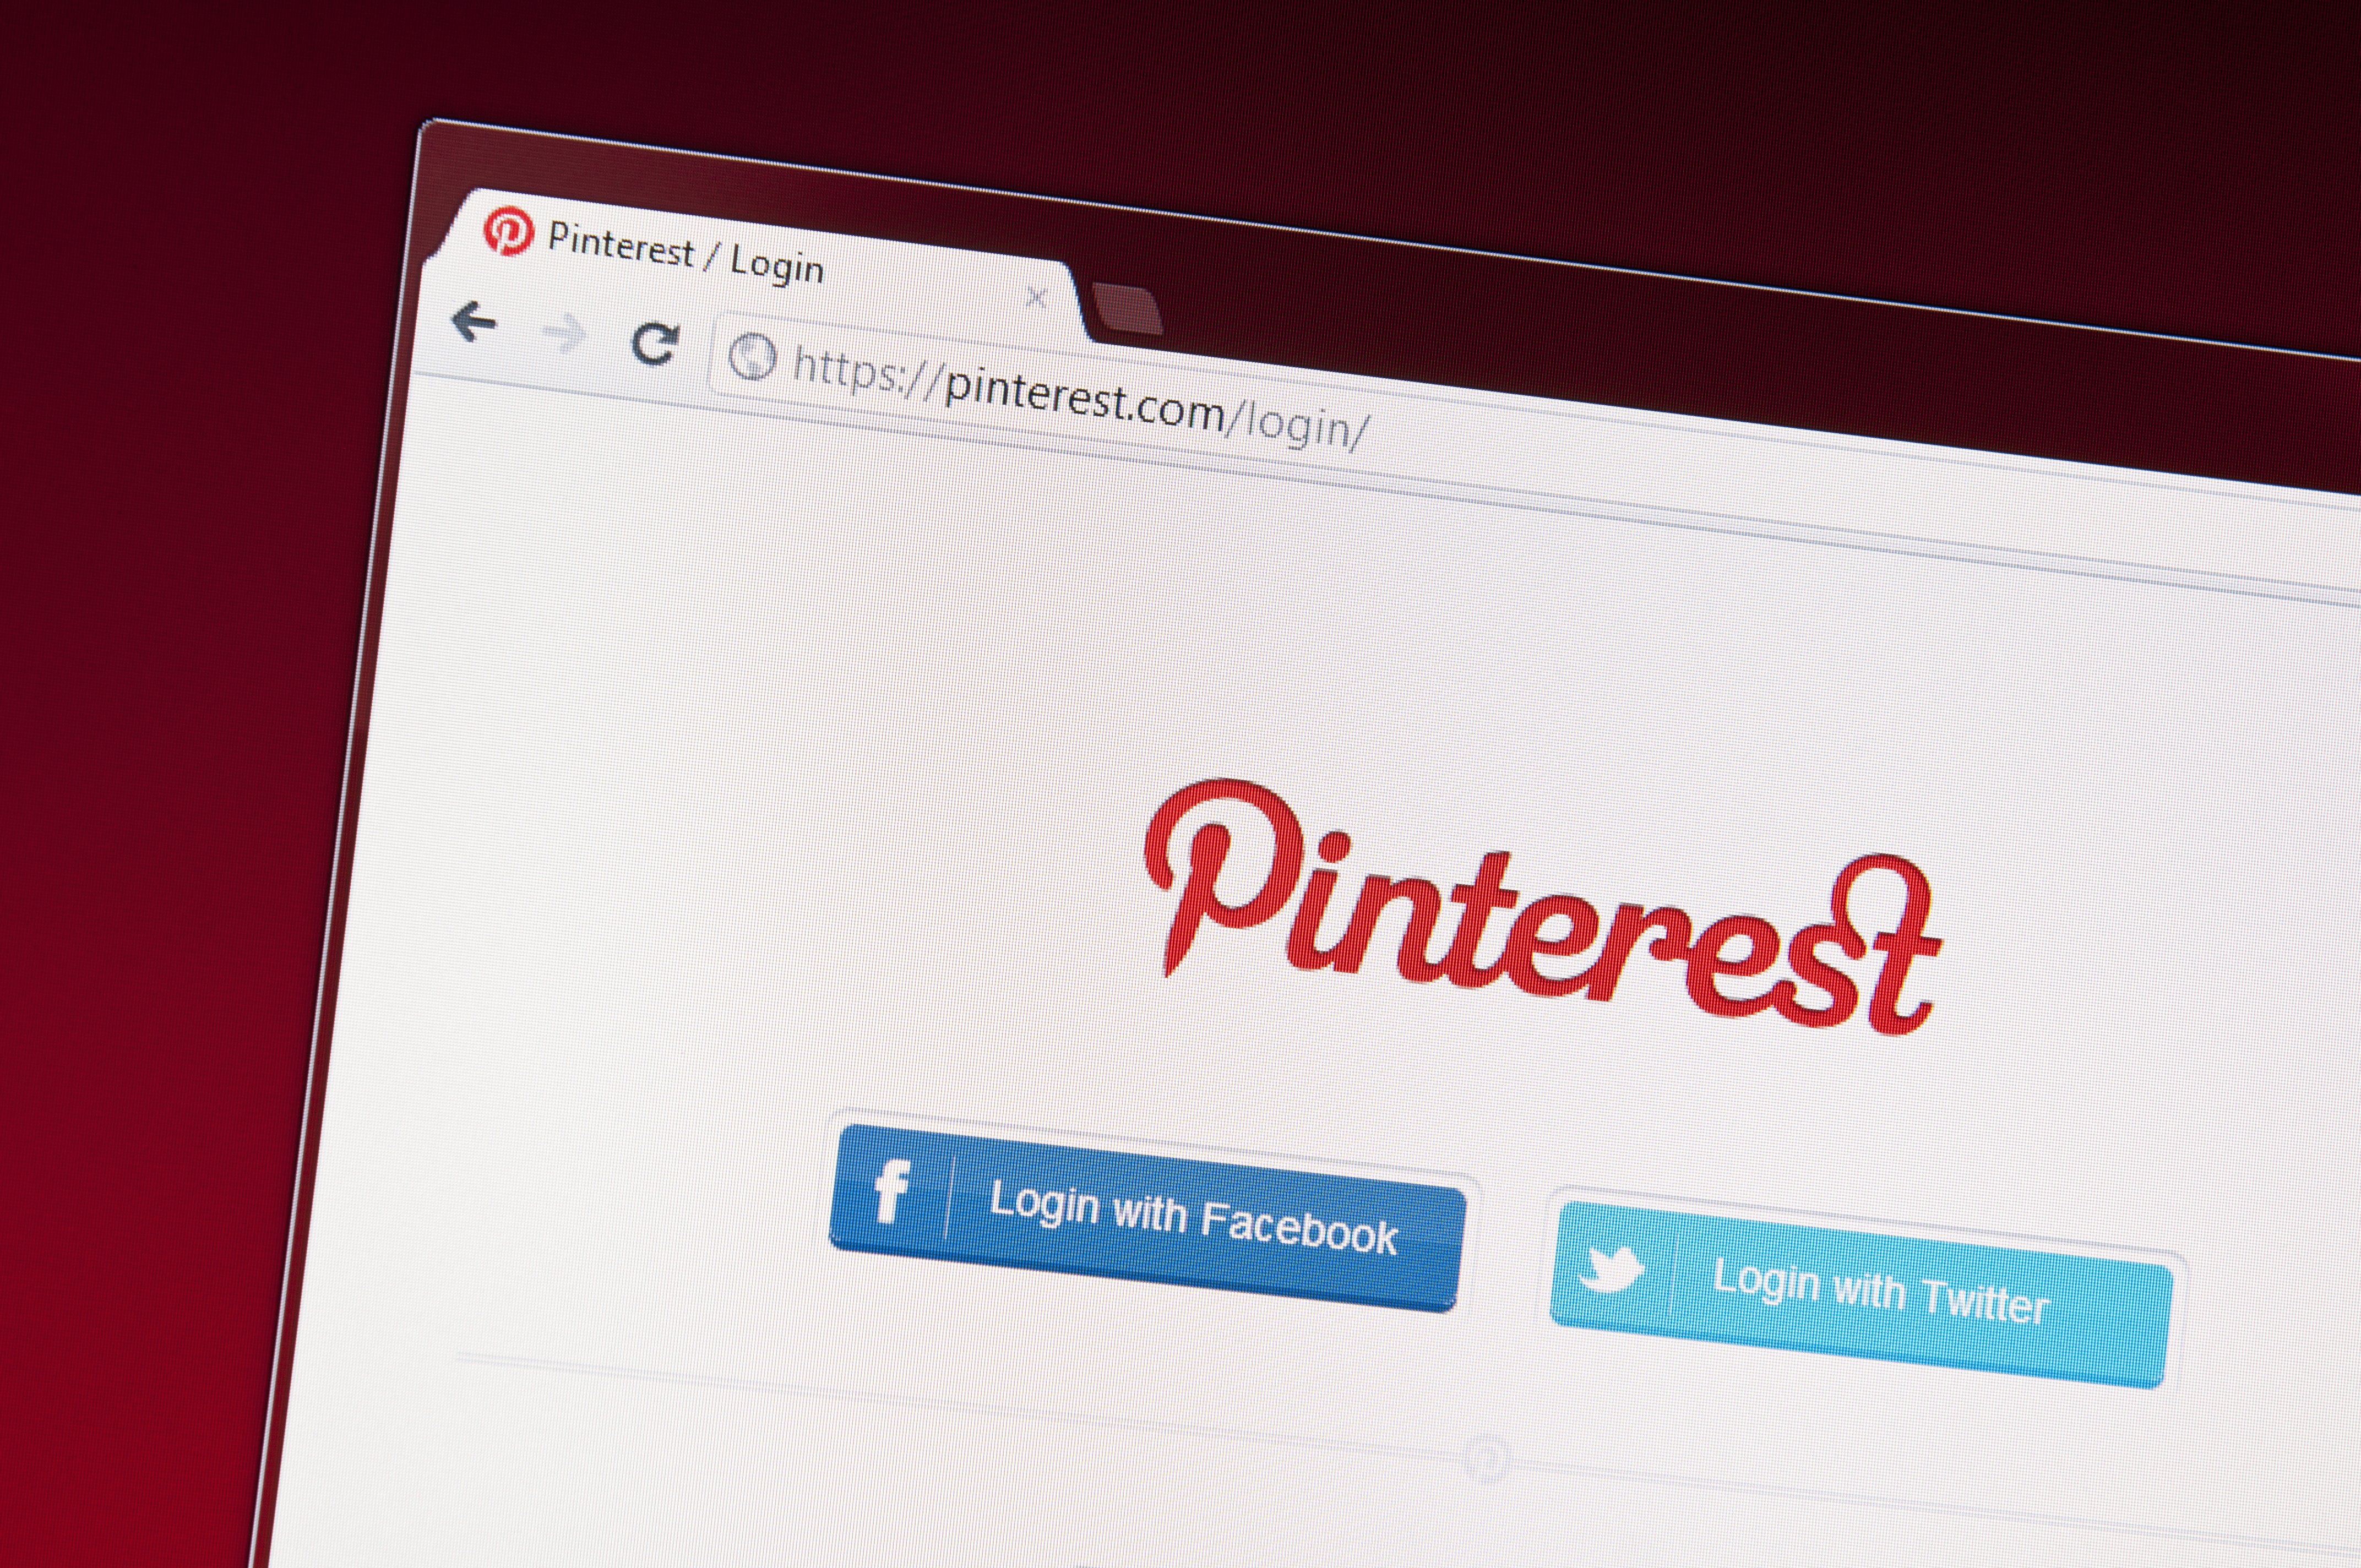 Why Paypal buying Pinterest isn't really that weird